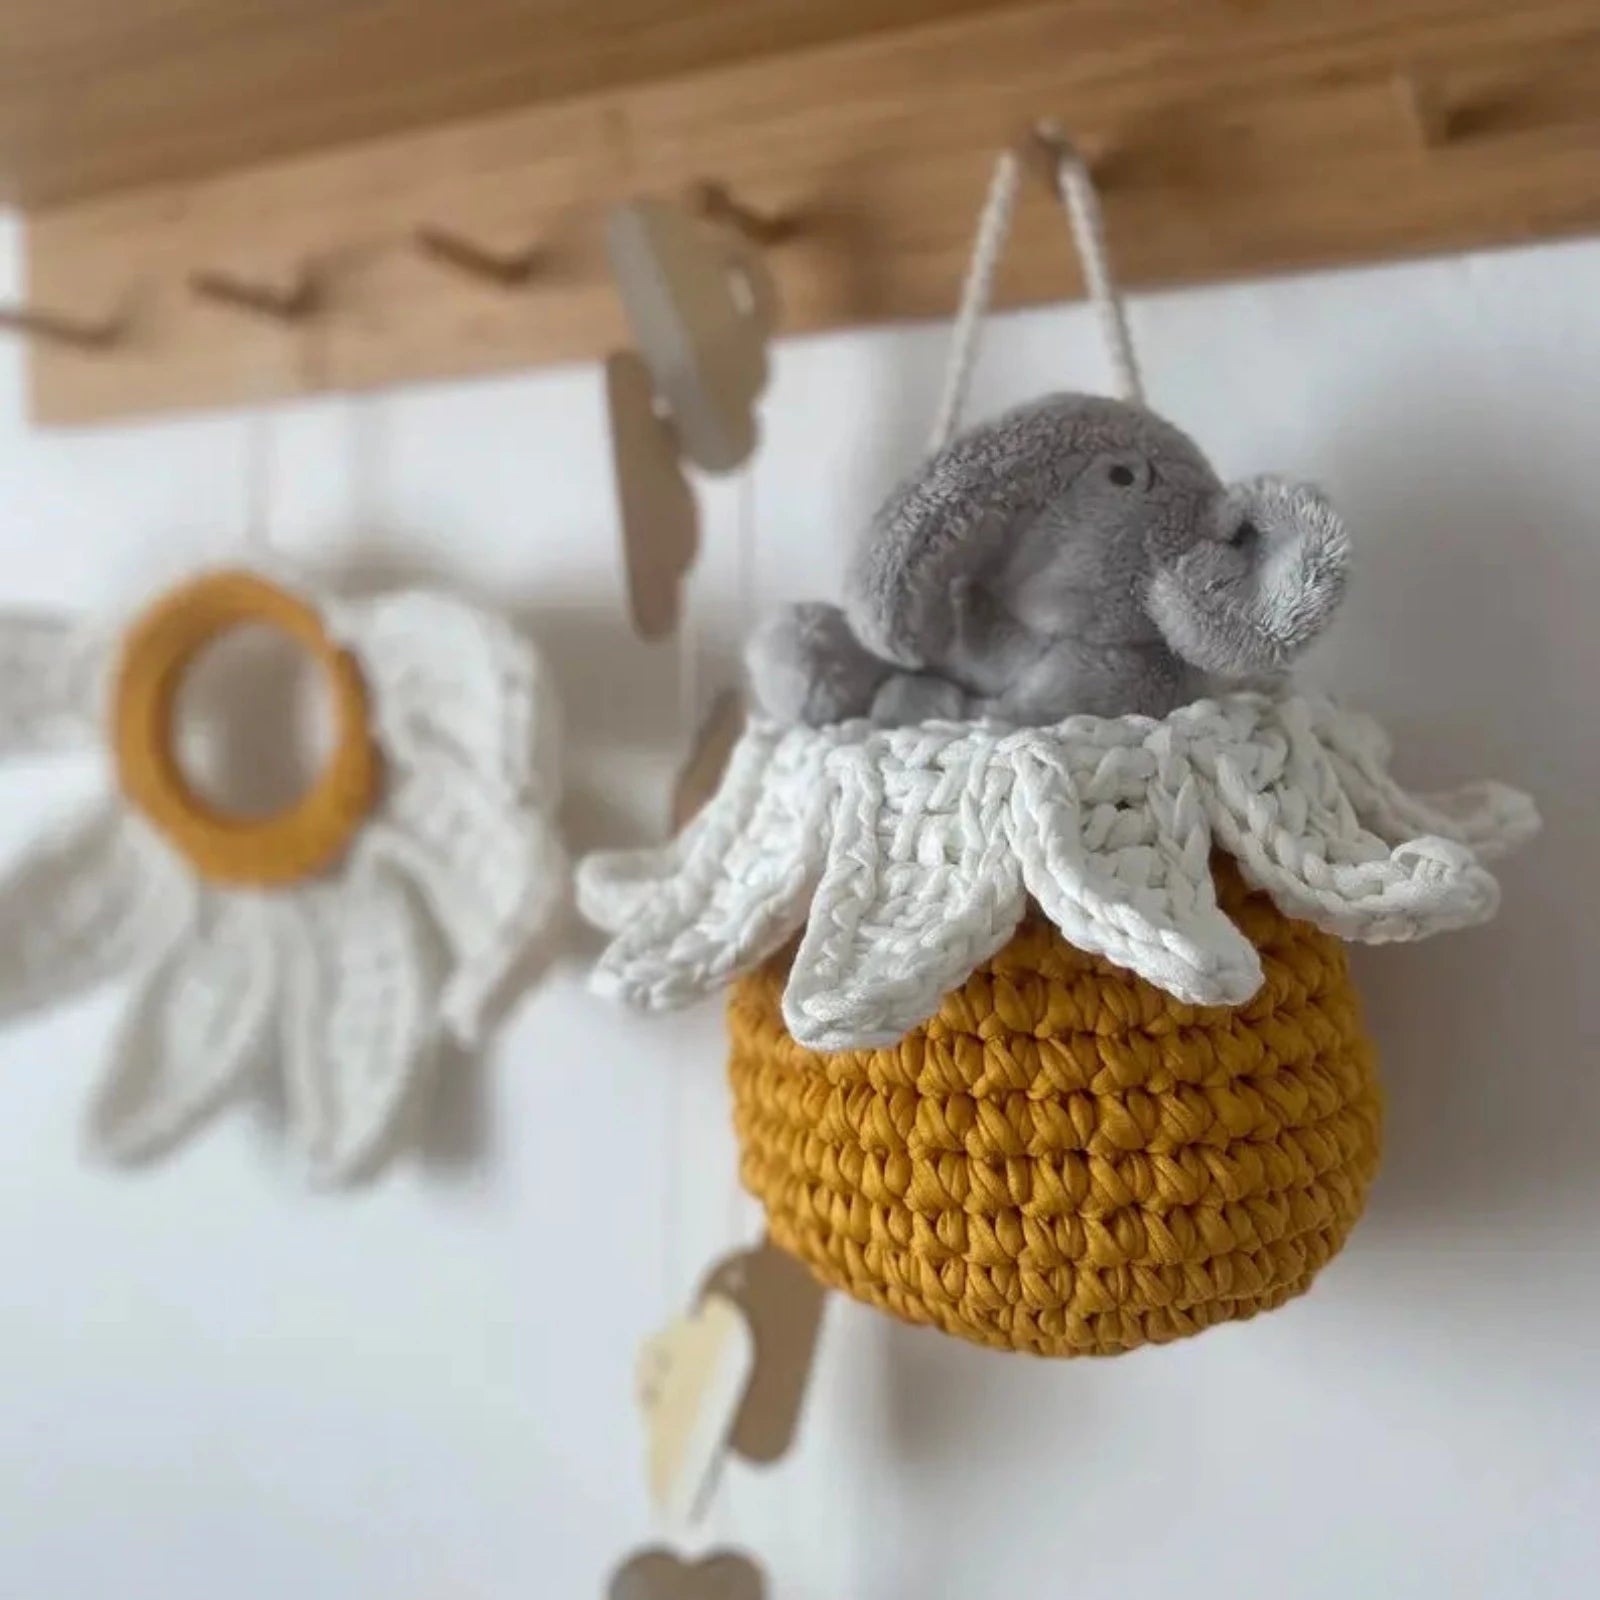 Daisy Flower Set | Wall Hanging Flower and Basket | Pearl White and Mustard - Looping Home